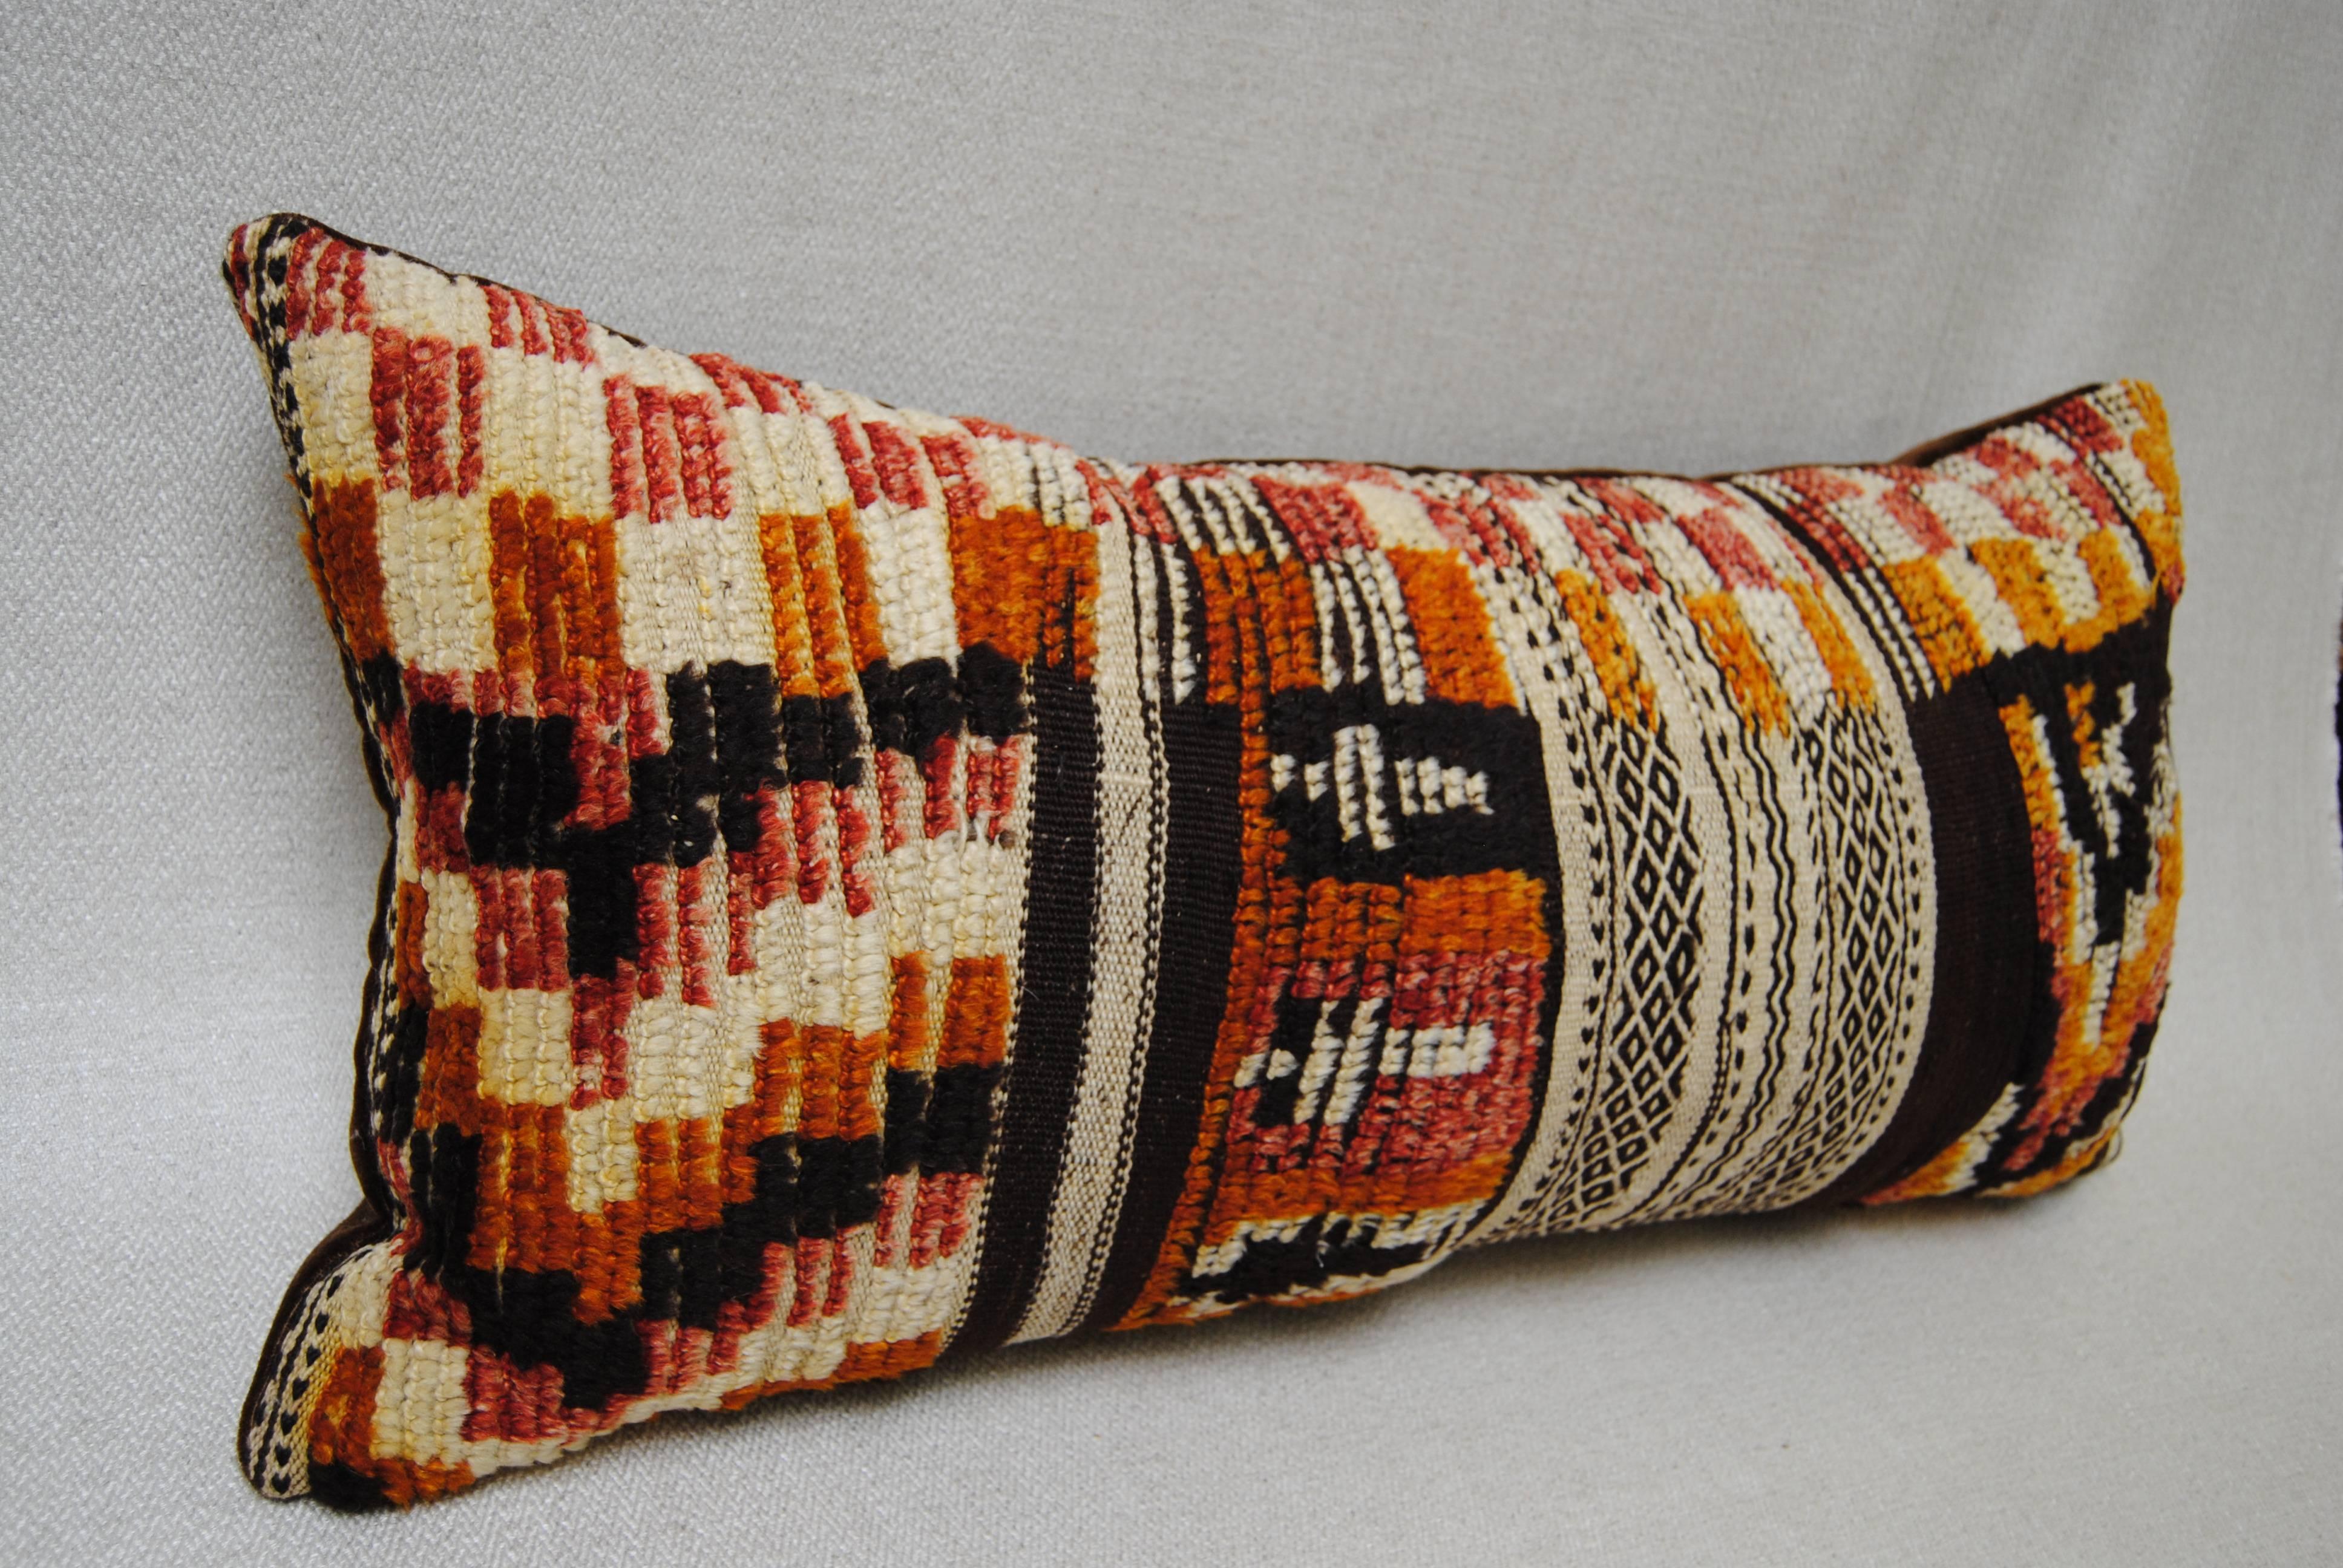 Custom pillow cut from a vintage hand-loomed wool Berber Moroccan rug from the Atlas Mountains. Wool is soft and lustrous with good natural color. The flat-weave is embellished with tufted designs. Pillow is backed in dark brown mohair, filled with